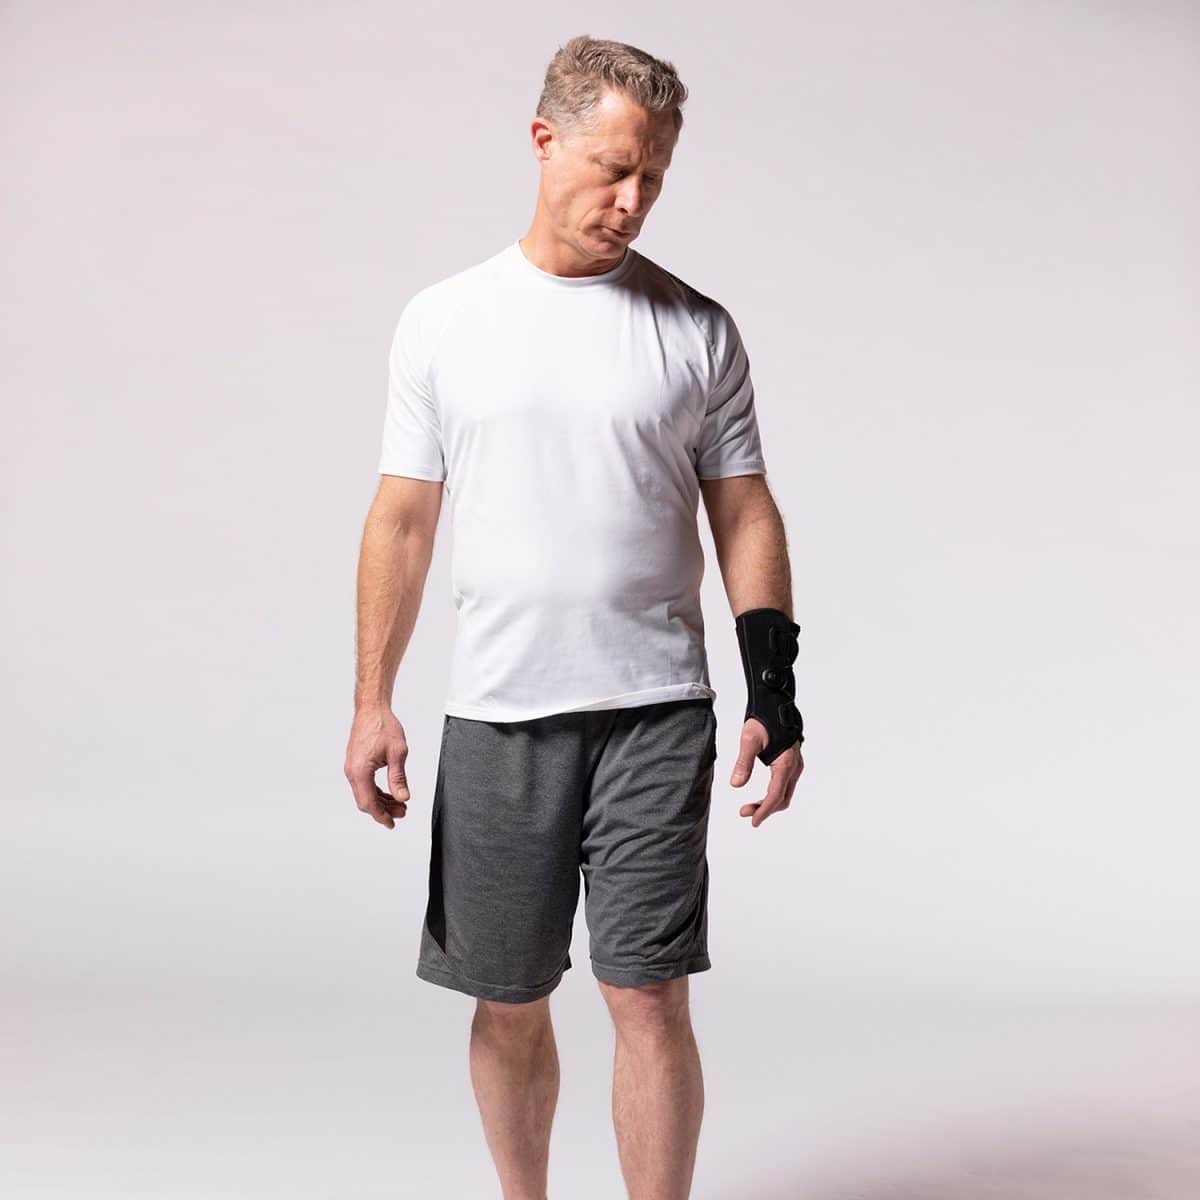 A man in PURESPEED+® WRIST and a white t-shirt.